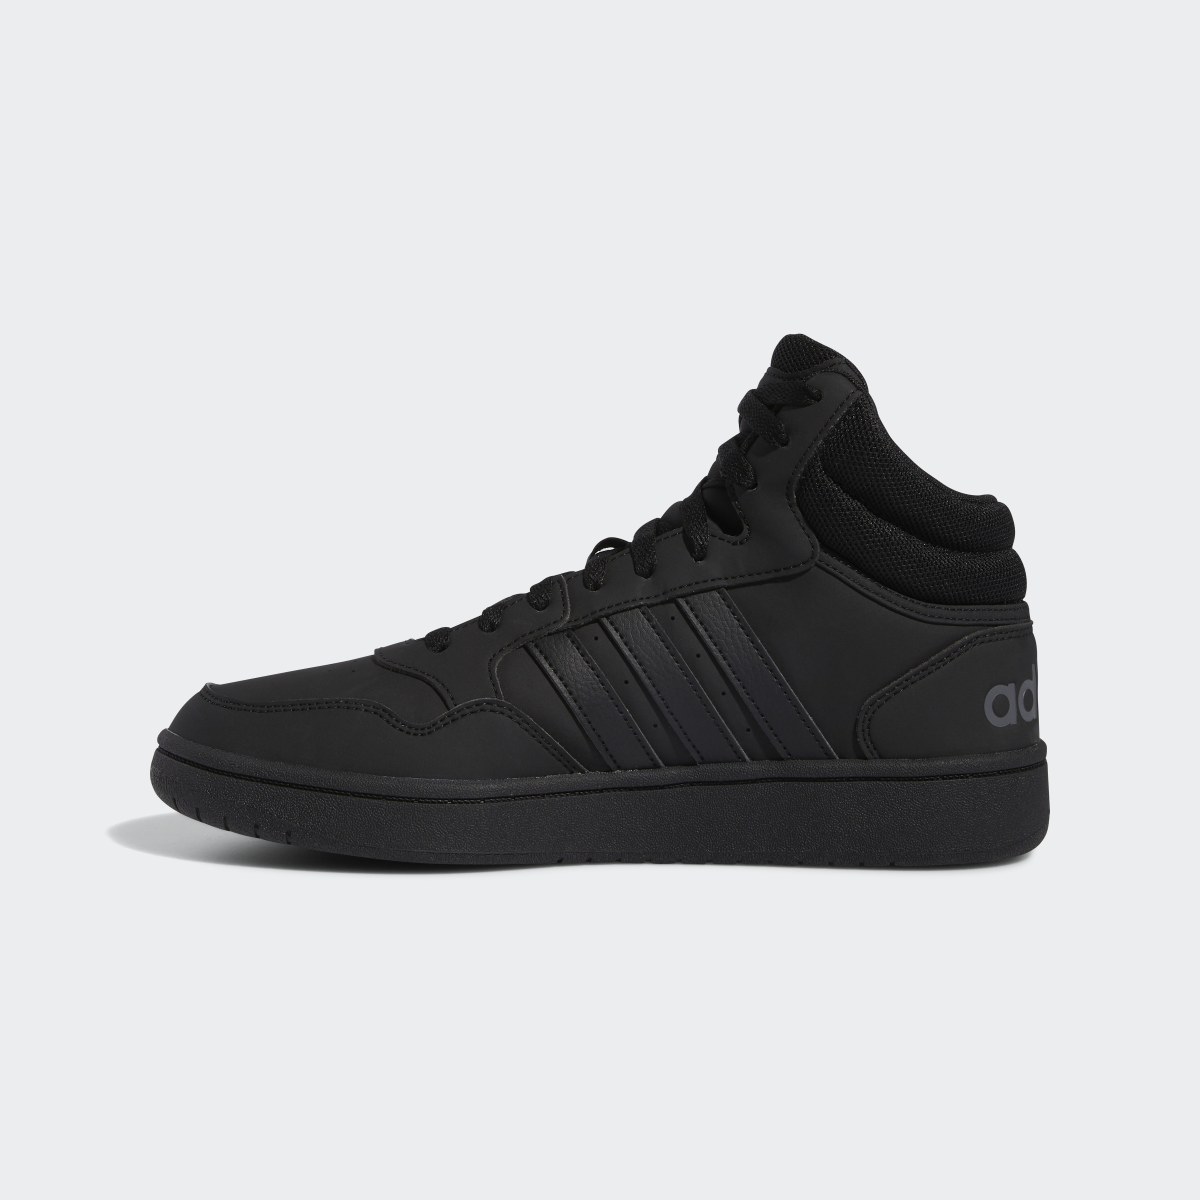 Adidas Hoops 3 Mid Lifestyle Basketball Mid Classic Shoes. 7